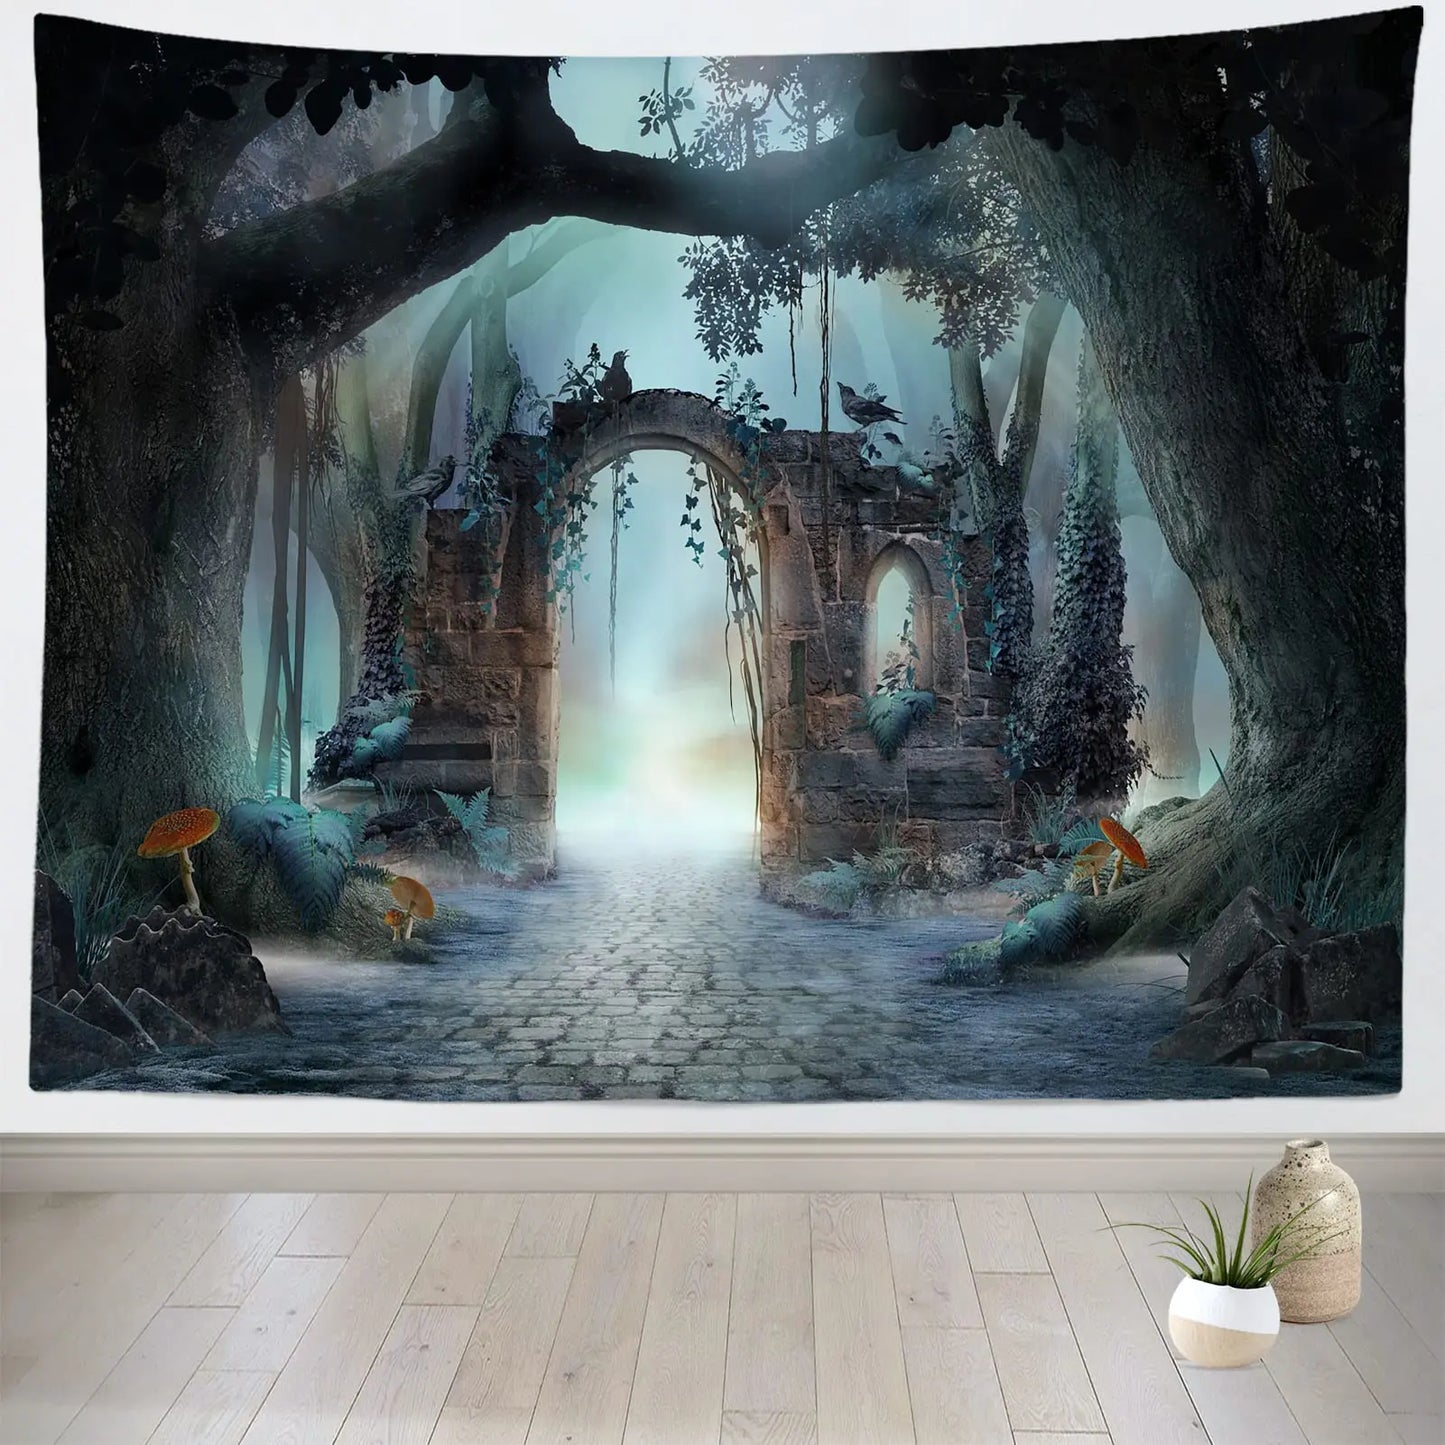 Fairytale Archway Tapestry Enchanted Forest Tapestry Wall Hanging Hazy Dark Mood Landscape Wall Tapestry Wall Art Room Decor